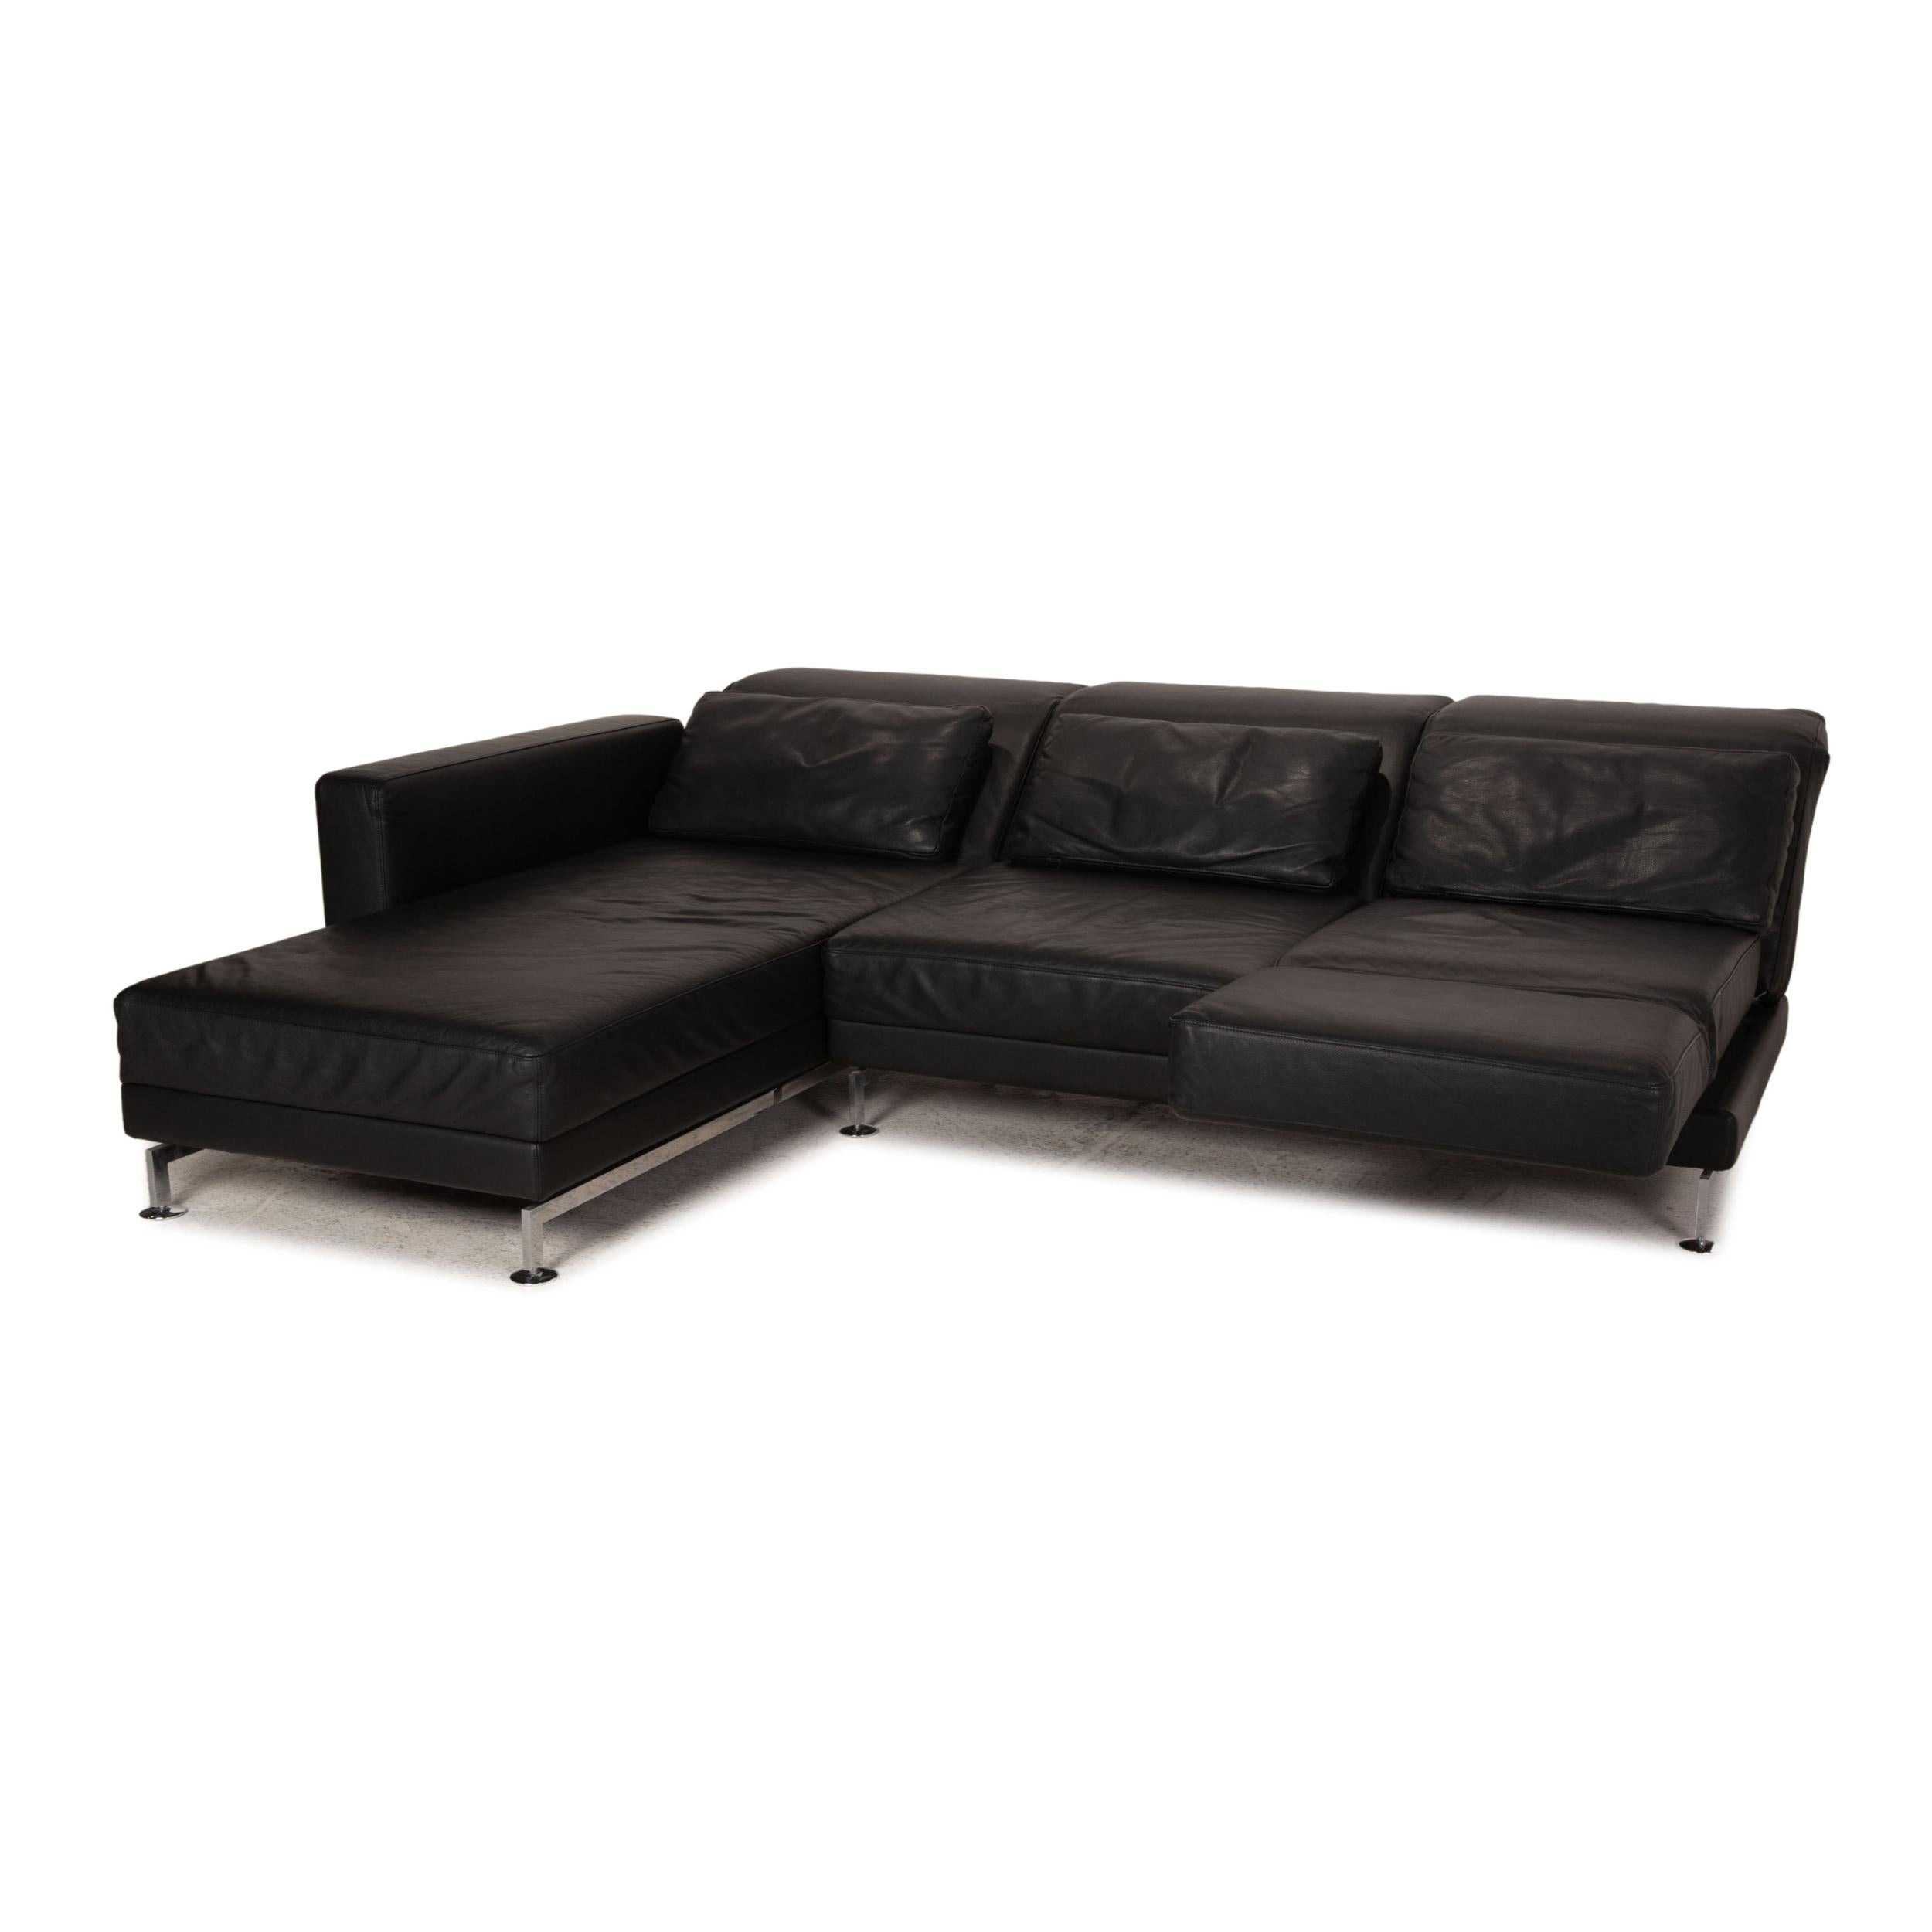 Modern Brühl & Sippold Moule Leather Sofa Black Corner Sofa Couch Function For Sale